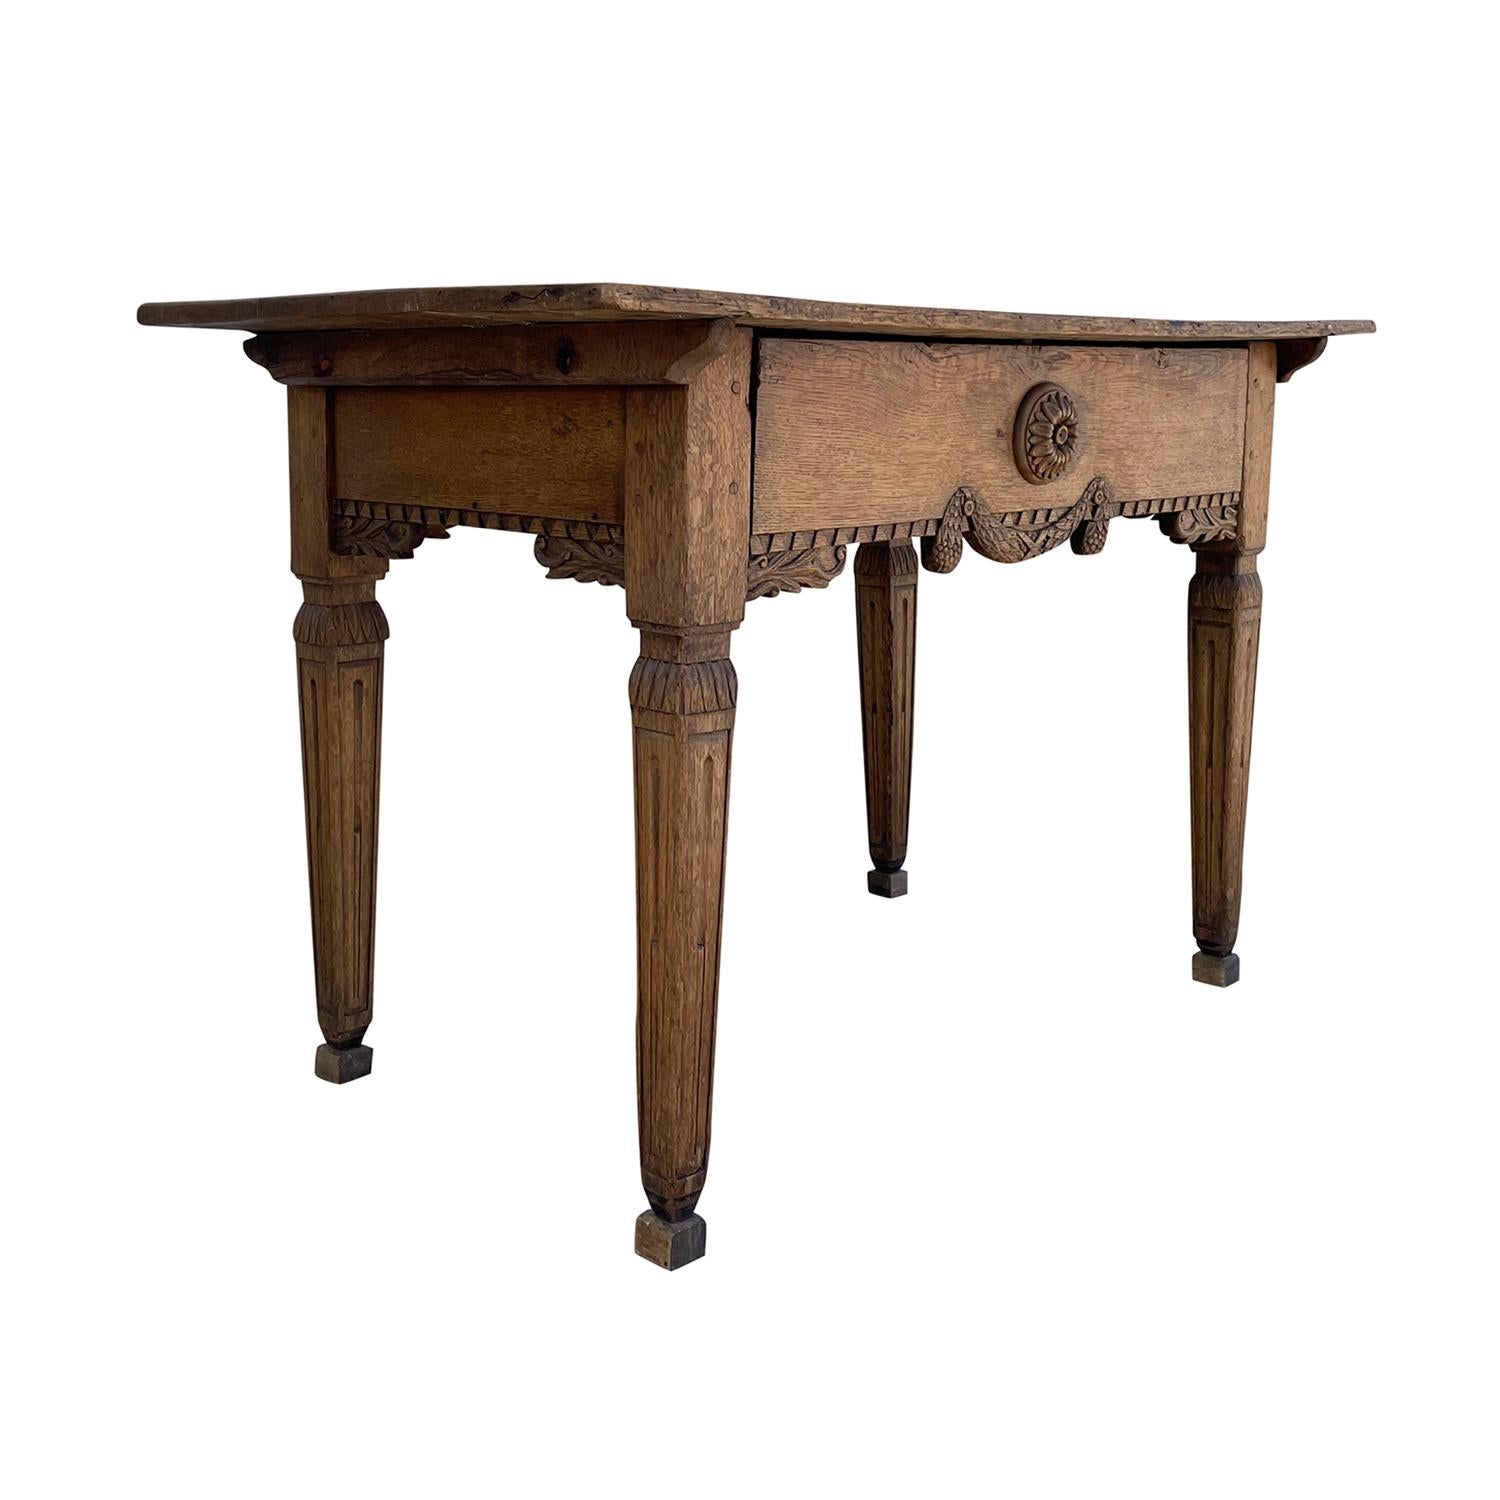 Hand-Carved 18th Century French Régence Console Table - Antique Oakwood Farm, End Table